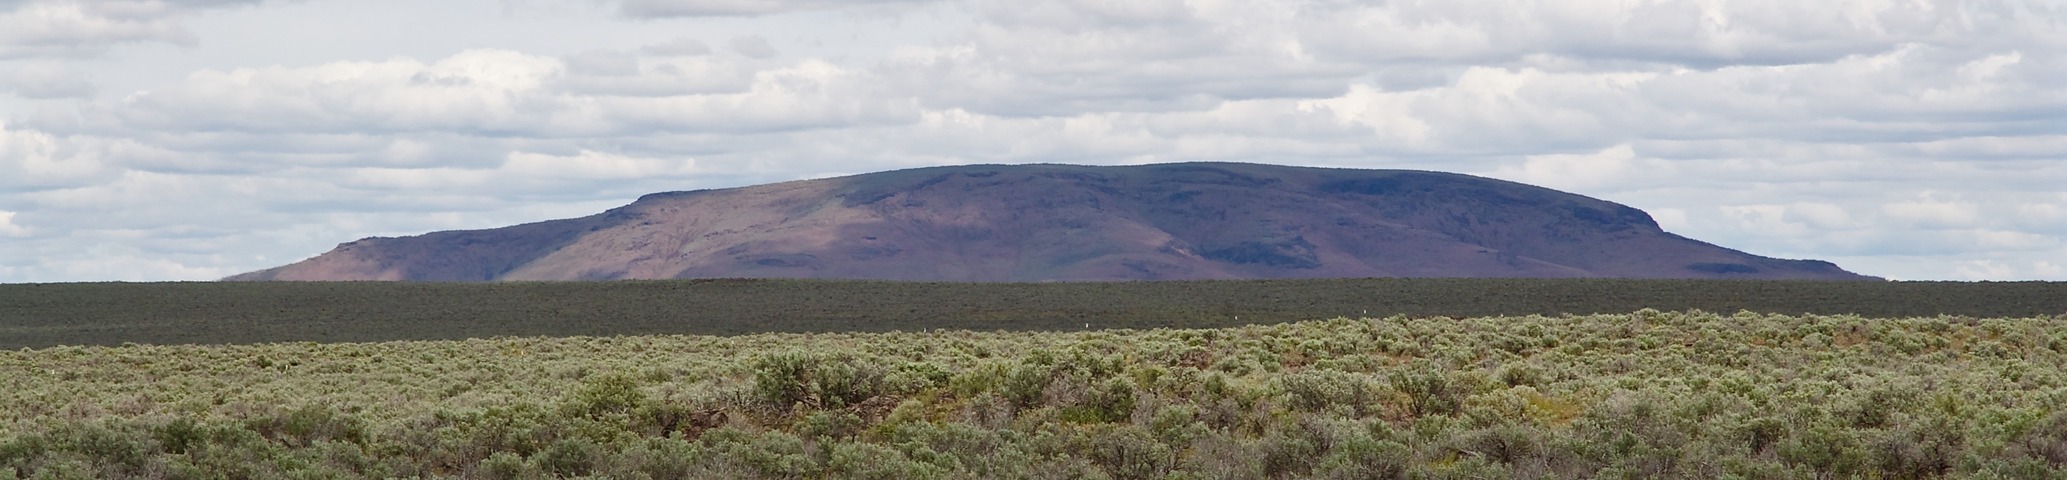 A close-up view of Saddle Butte - 5 miles northeast of the point